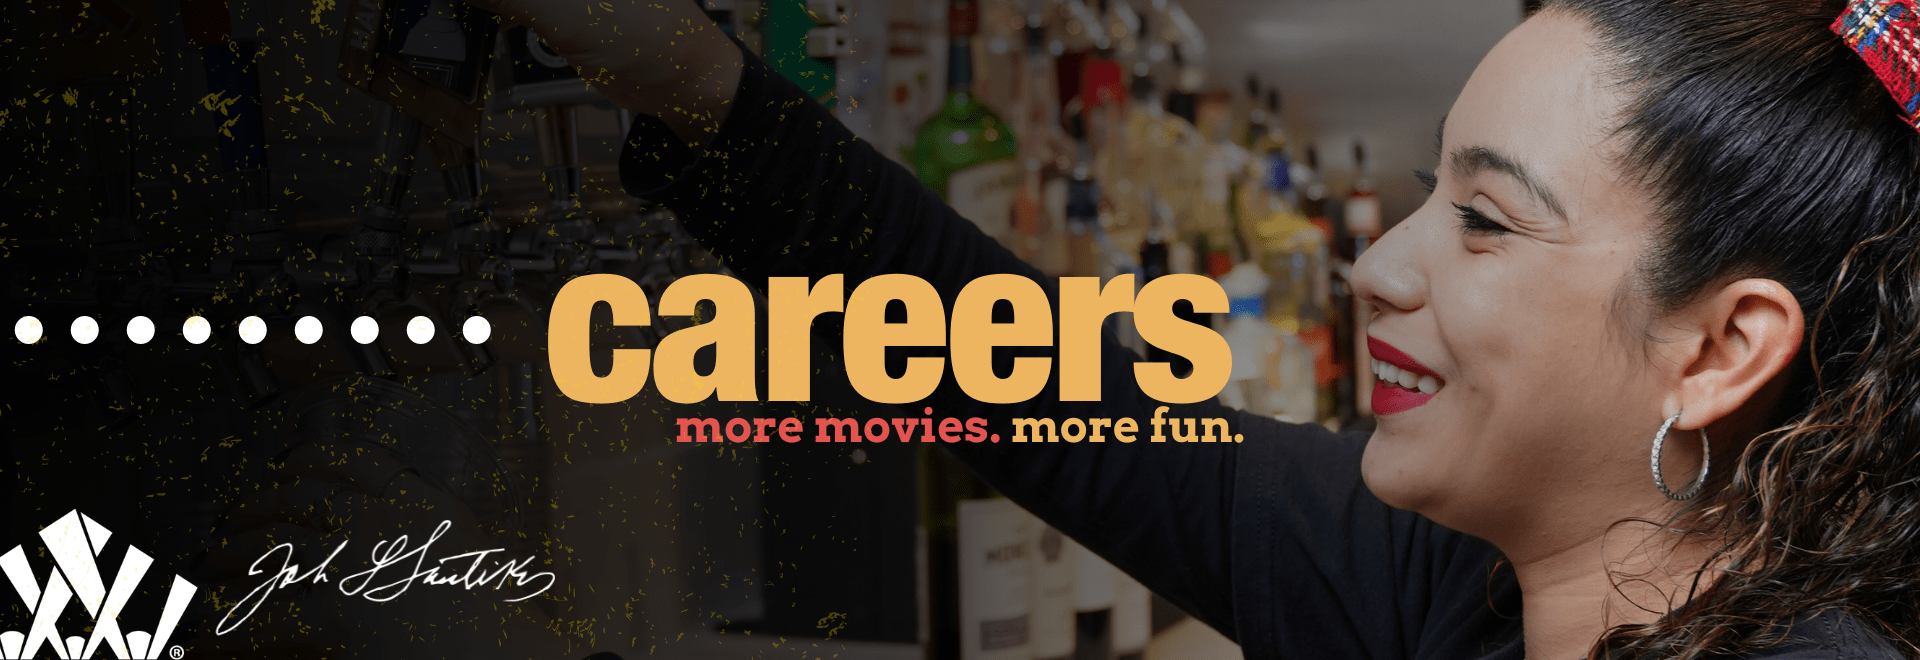 Fun, modern graphic promoting Santikos Theater Careers featuring a happy bar tender at work